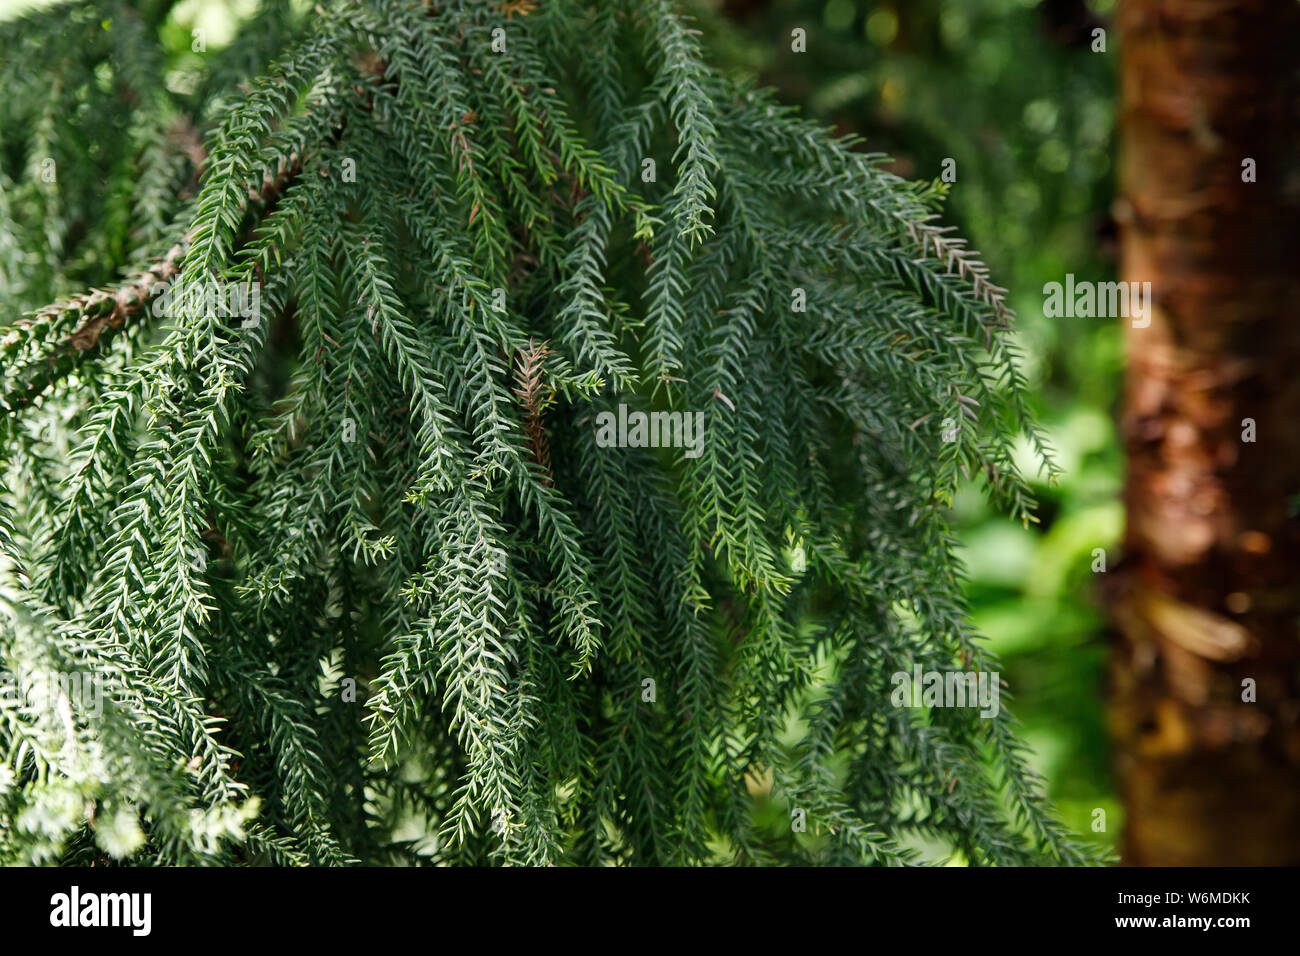 Araucaria heterophylla, it is sometimes called the star pine, the Norfolk pine, the triangular tree or the living Christmas tree. Araucaria pine for i Stock Photo